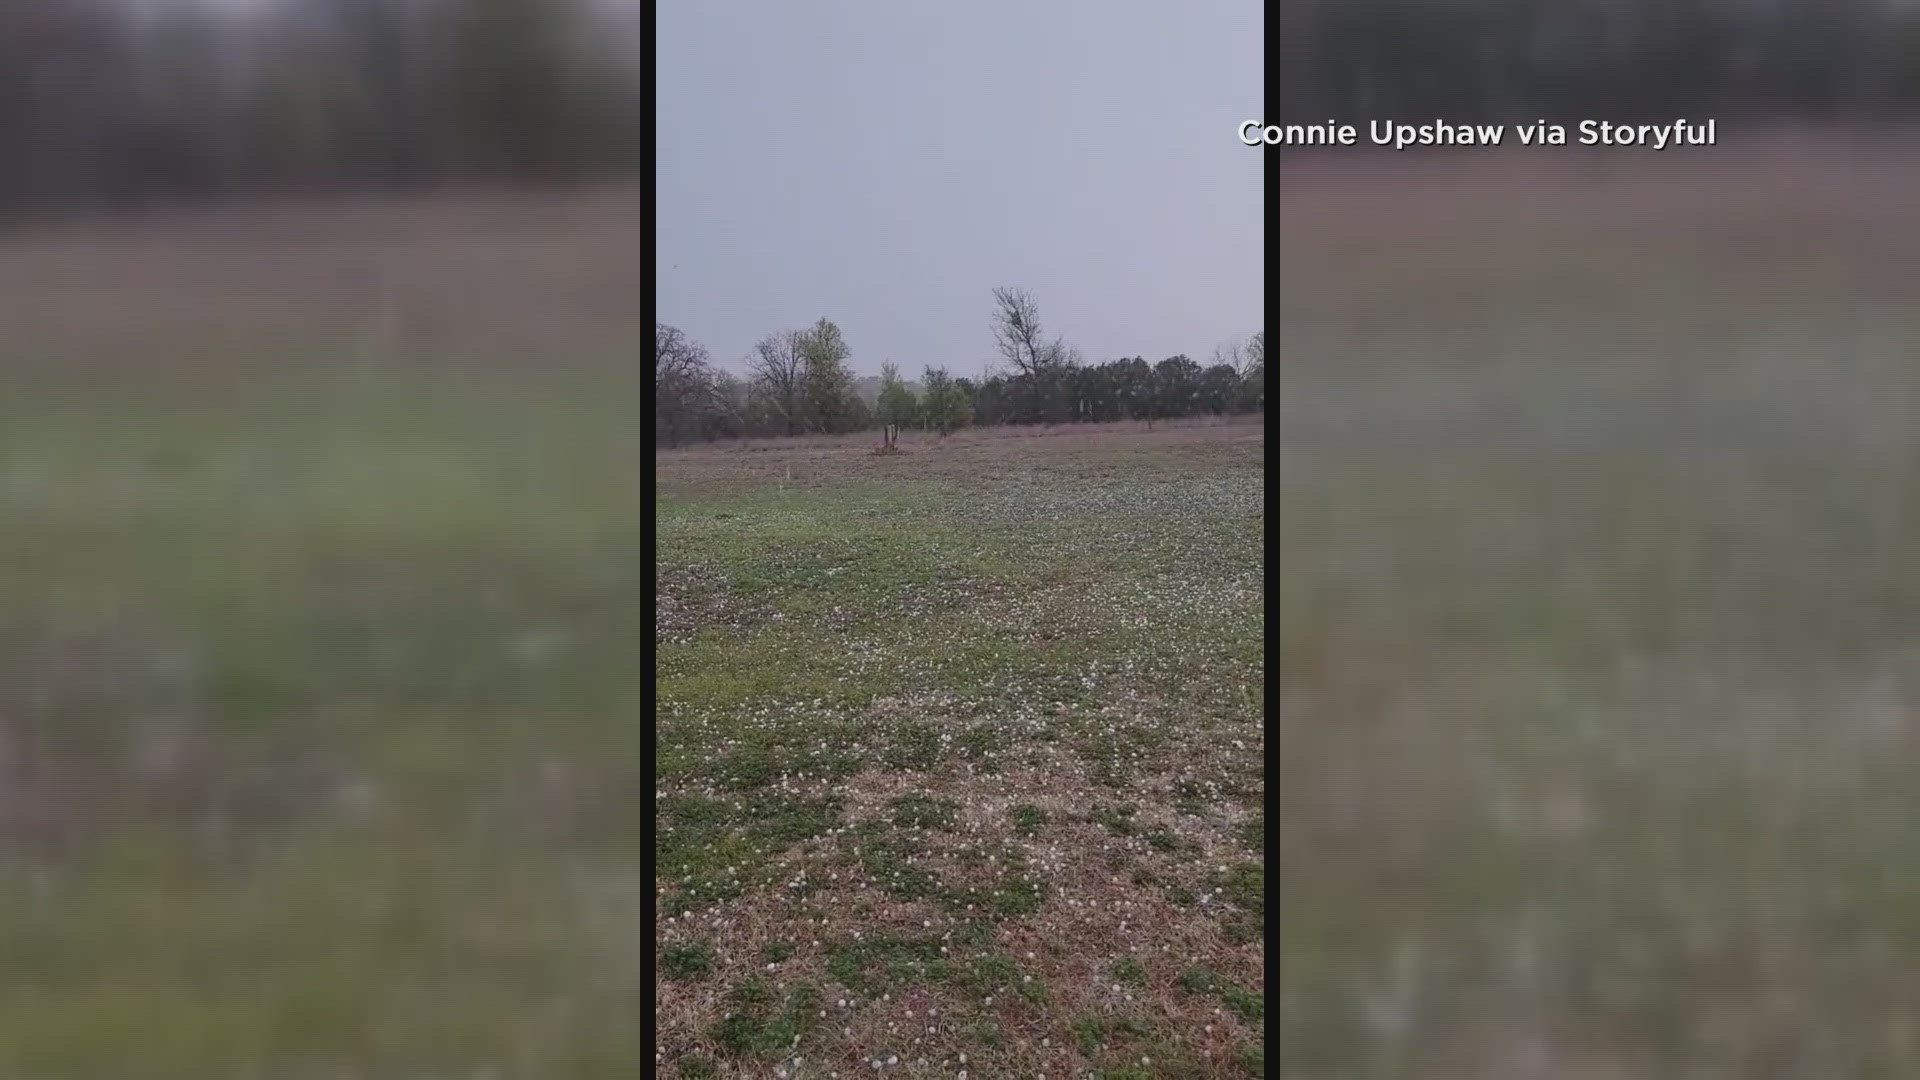 Thunderstorms were dropping large and potentially damaging hail across North Texas on Thursday afternoon, March 16, the National Weather Service (NWS) warned.